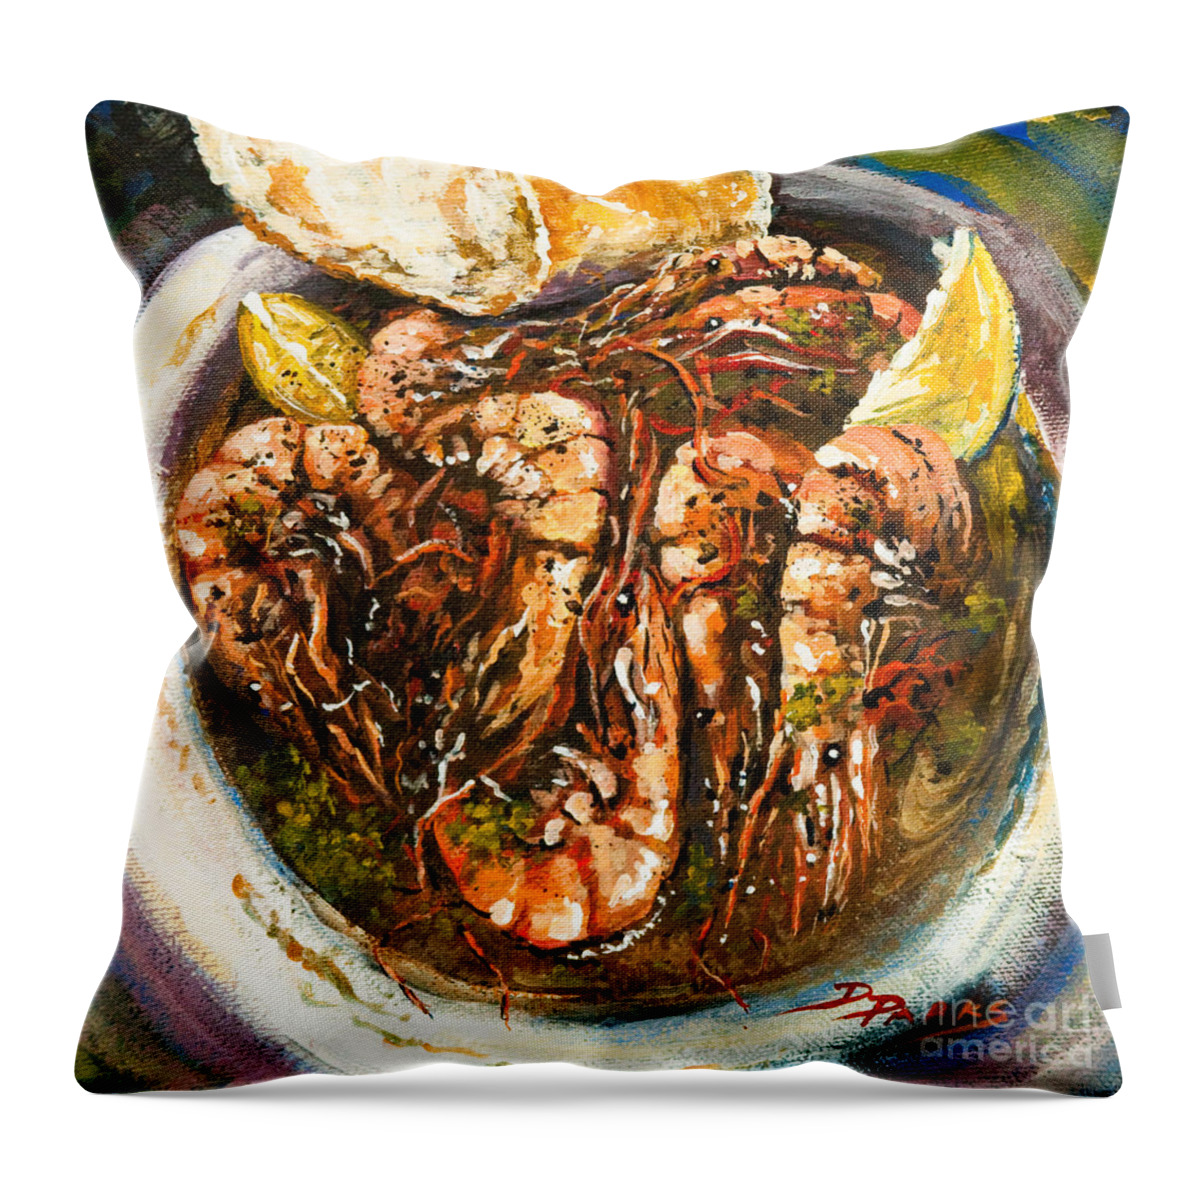 New Orleans Barbequed Shrimp Throw Pillow featuring the painting Barbequed Shrimp by Dianne Parks